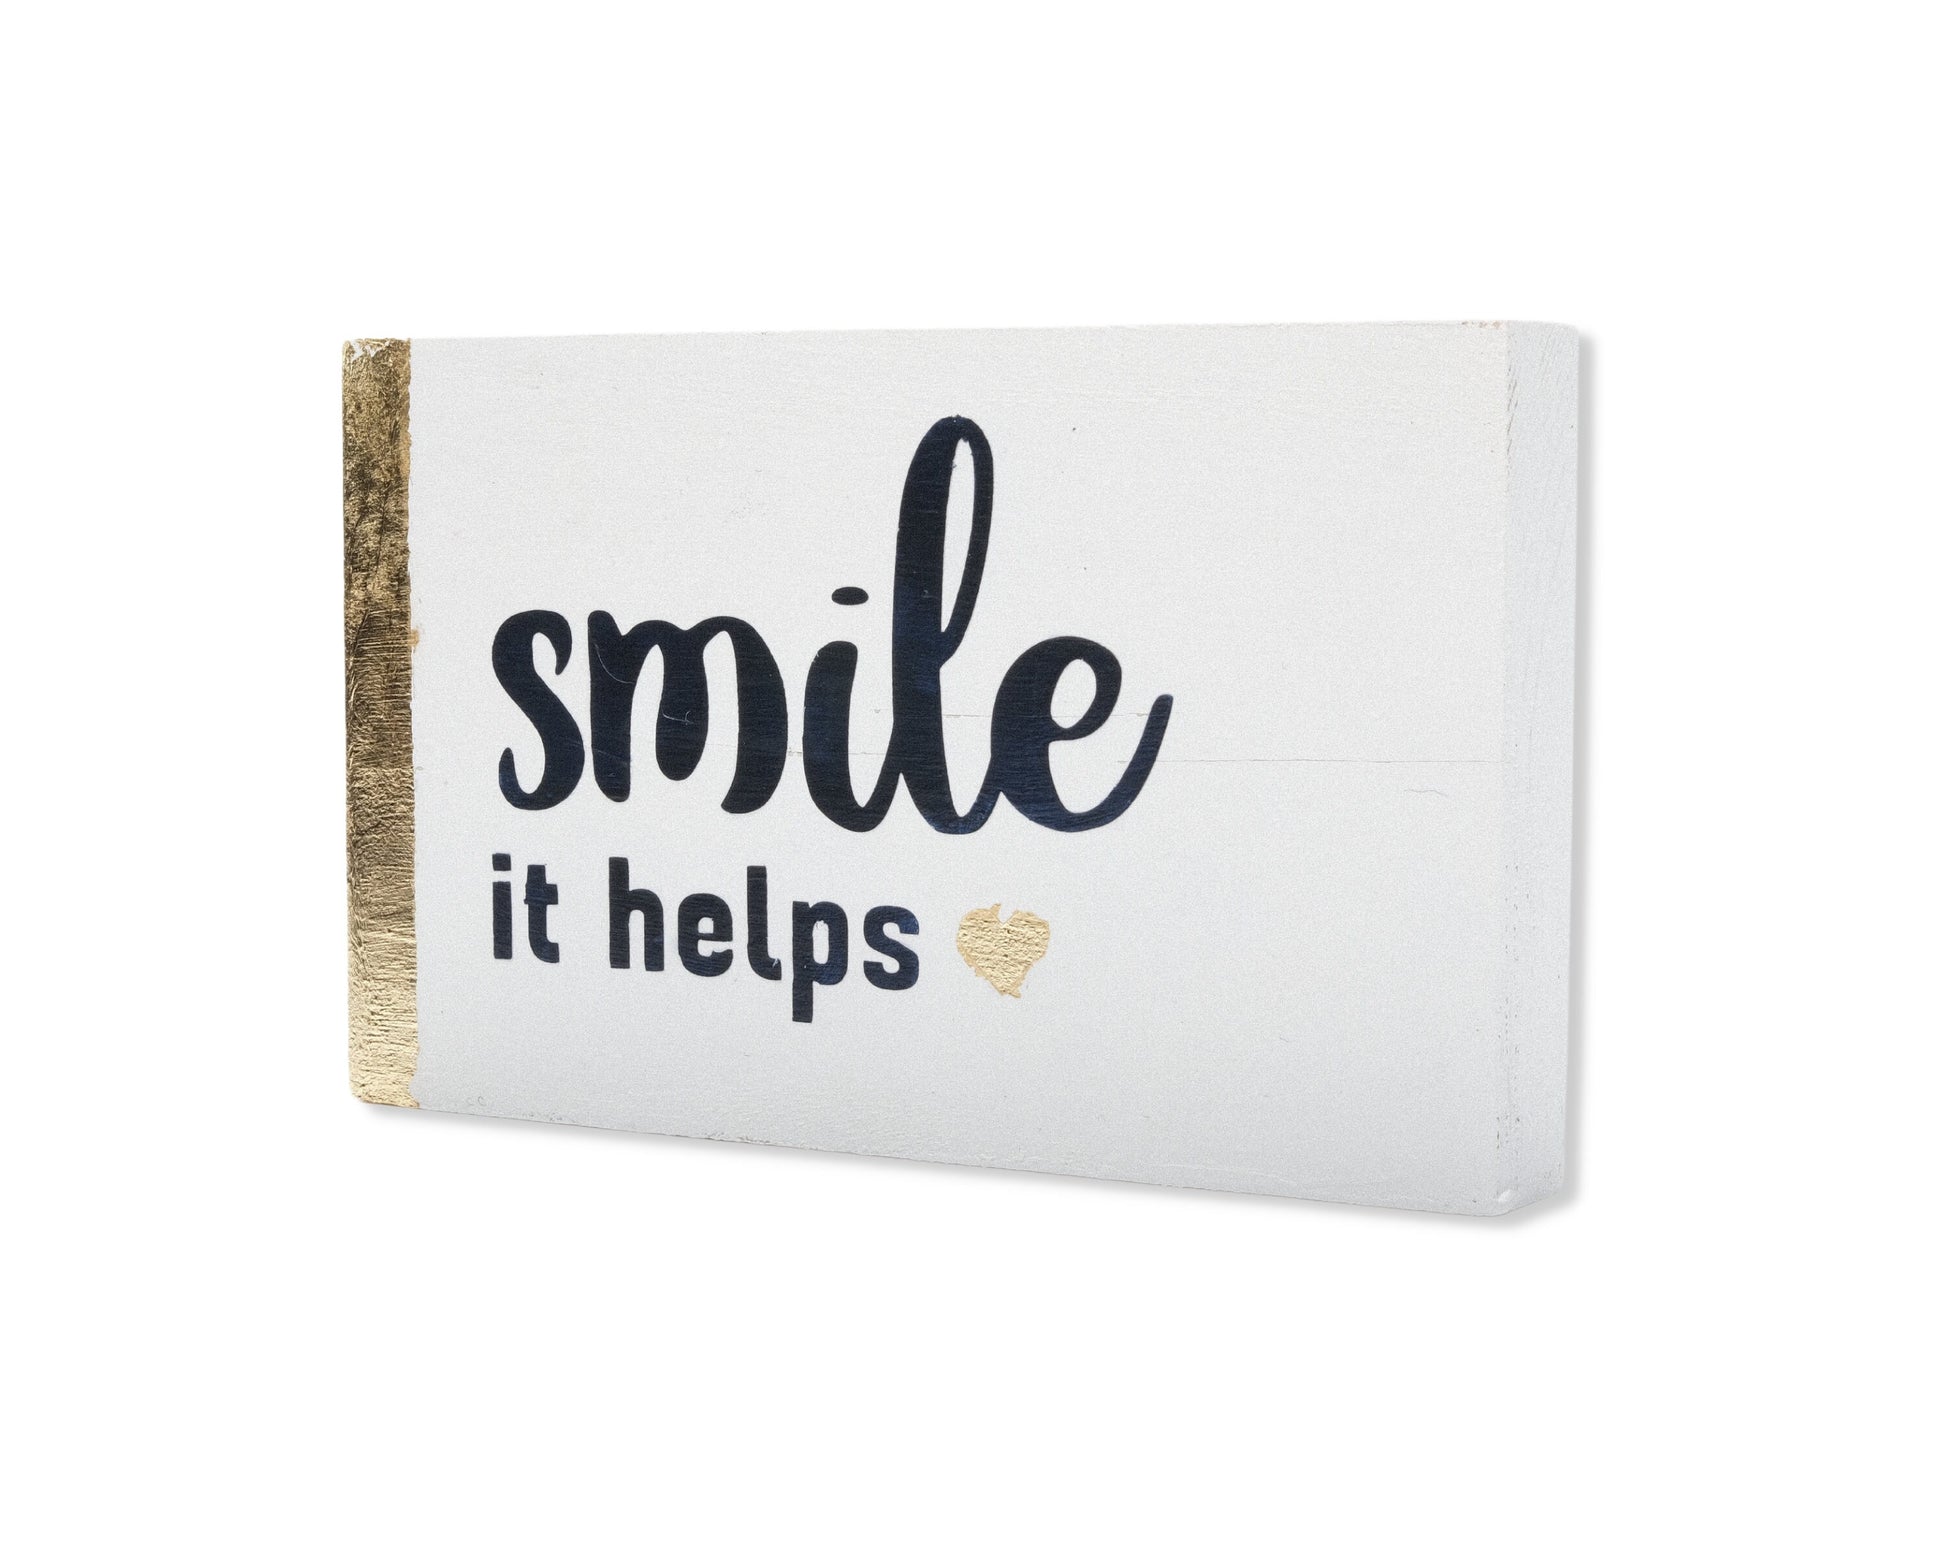 Small freestanding rectangular wooden sign displayed at 35 degree angle to show depth of sign. White wood stain, with gold vertical border on left side only. Black painted message, Smile it helps. Small solid heart in gold. Studio style photo.